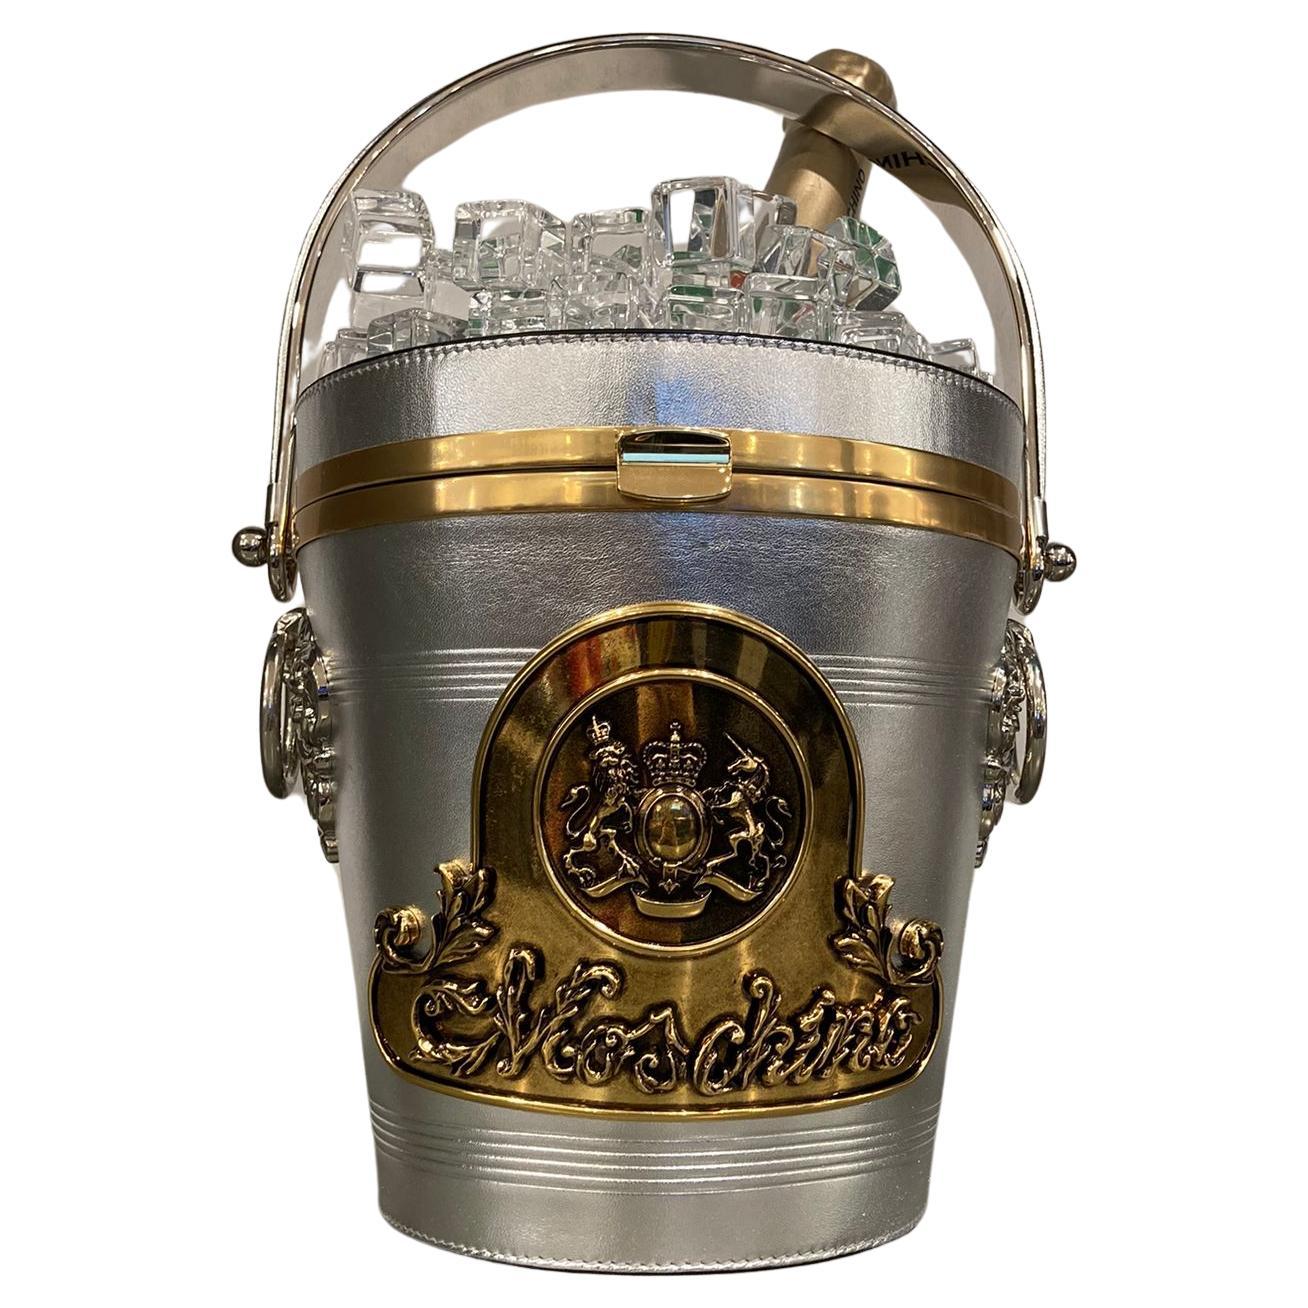 

THE HOLY GRAIL OF ALL MOSCHINO BAGS!



MOSCHINO COUTURE

CHAMPAGNE ICE BUCKET LEATHER LOGO PLAQUE BAG

AW22 Collection by Jeremy Scott



MSRP $5,175 + tax!



Rare and Highly Sought After Collector's Item




Limited Availability and Hard to